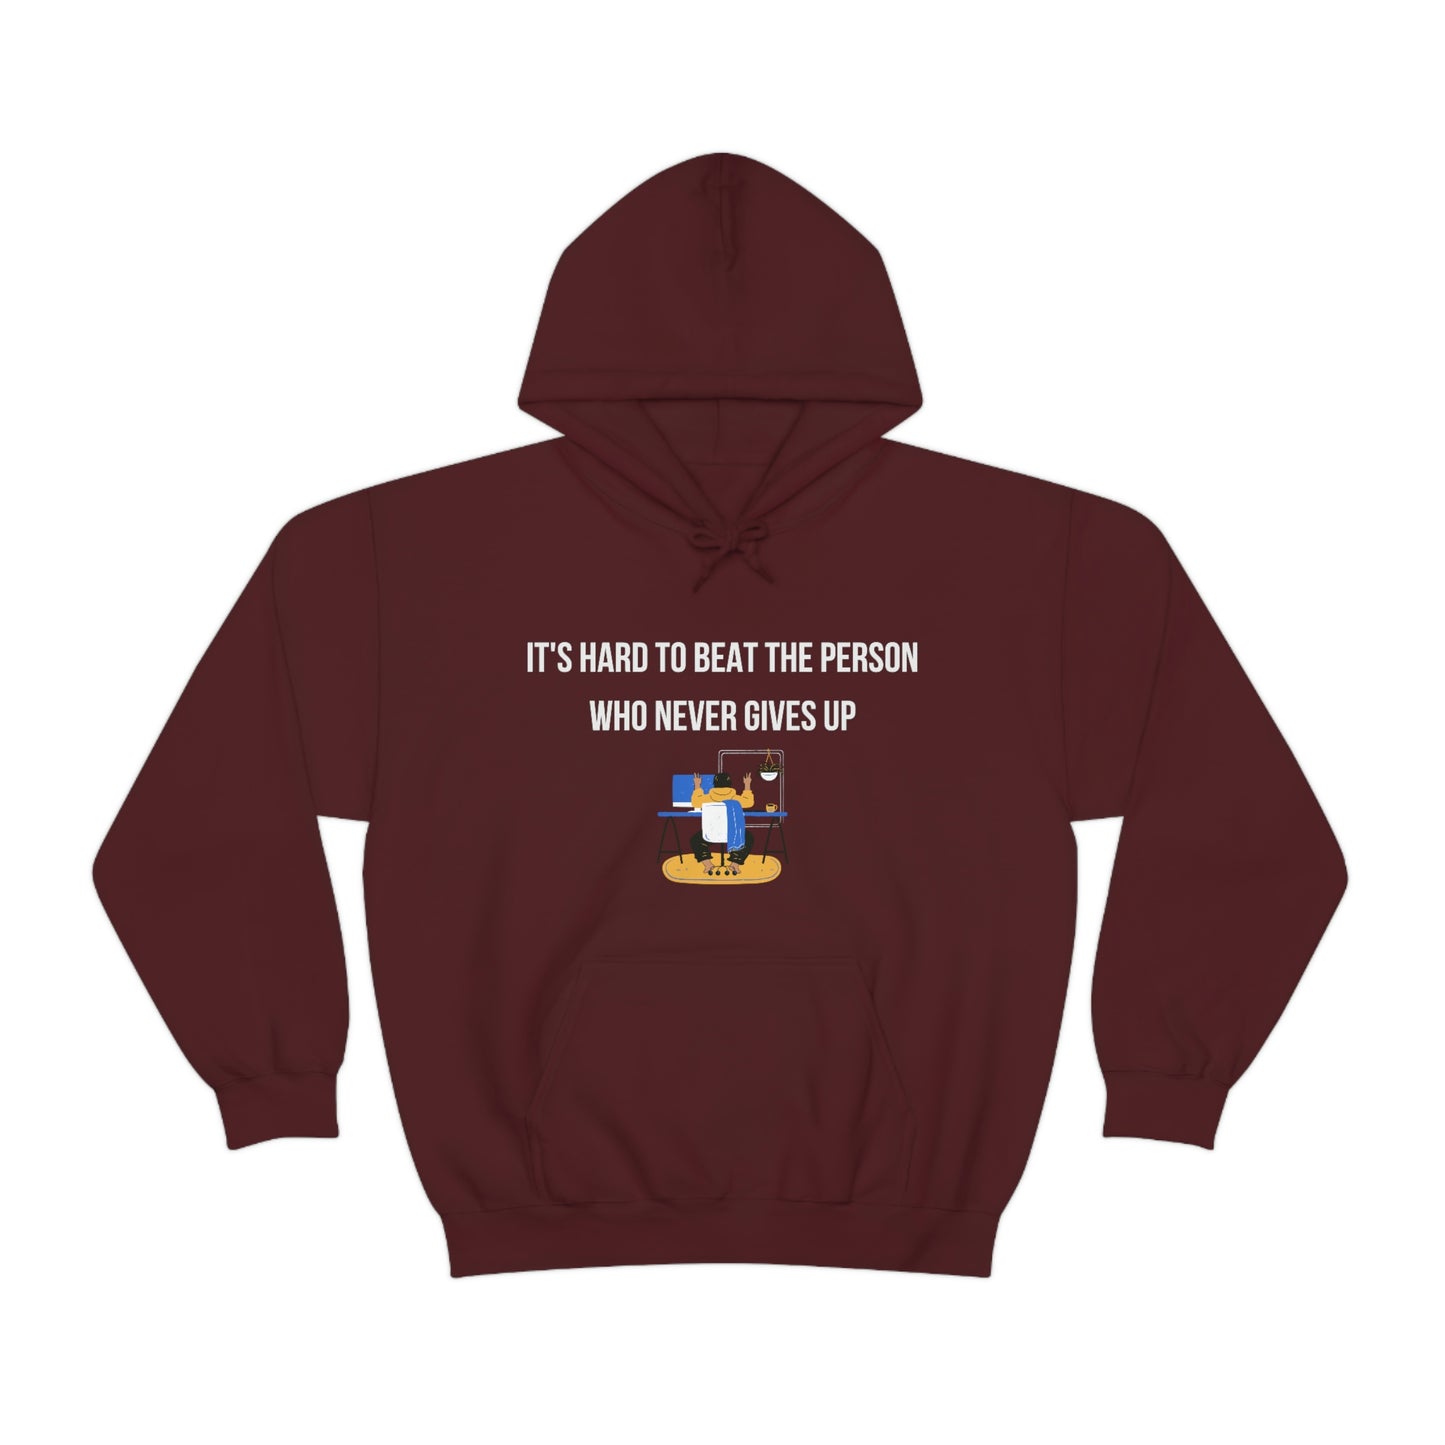 Hoodie for a High-Level Consistency